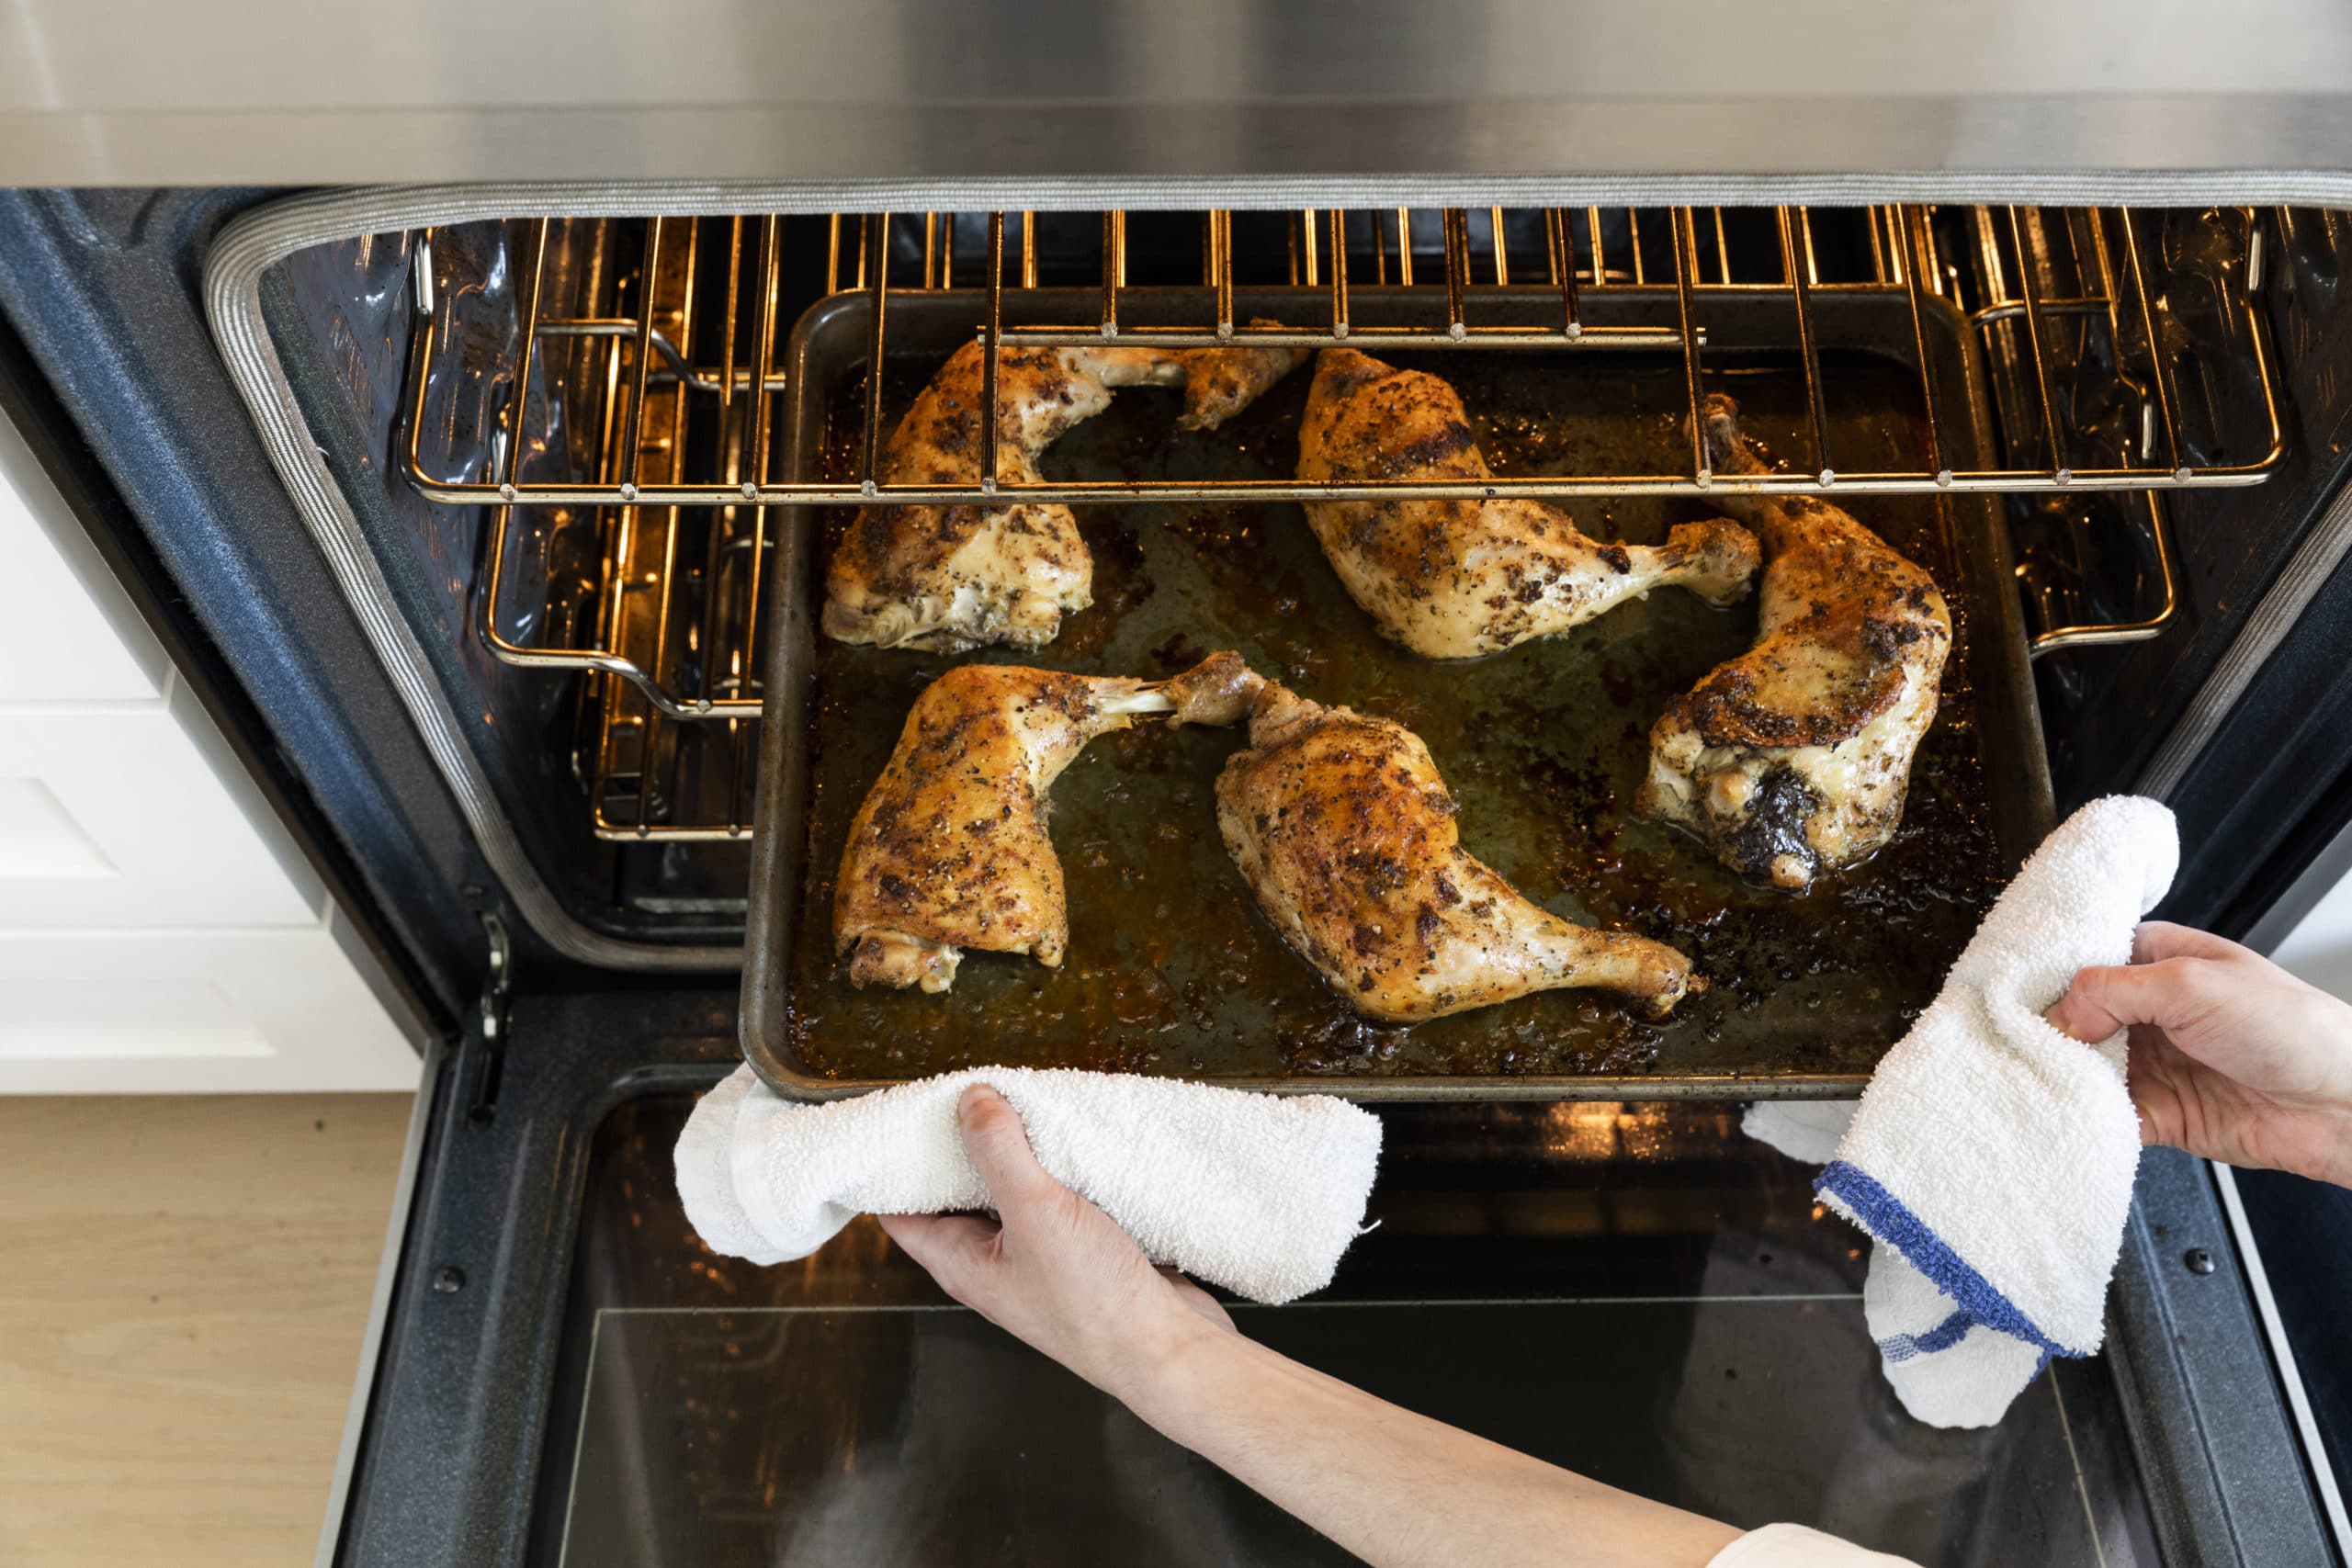 Roasted chicken thighs on a pan being placed into the oven